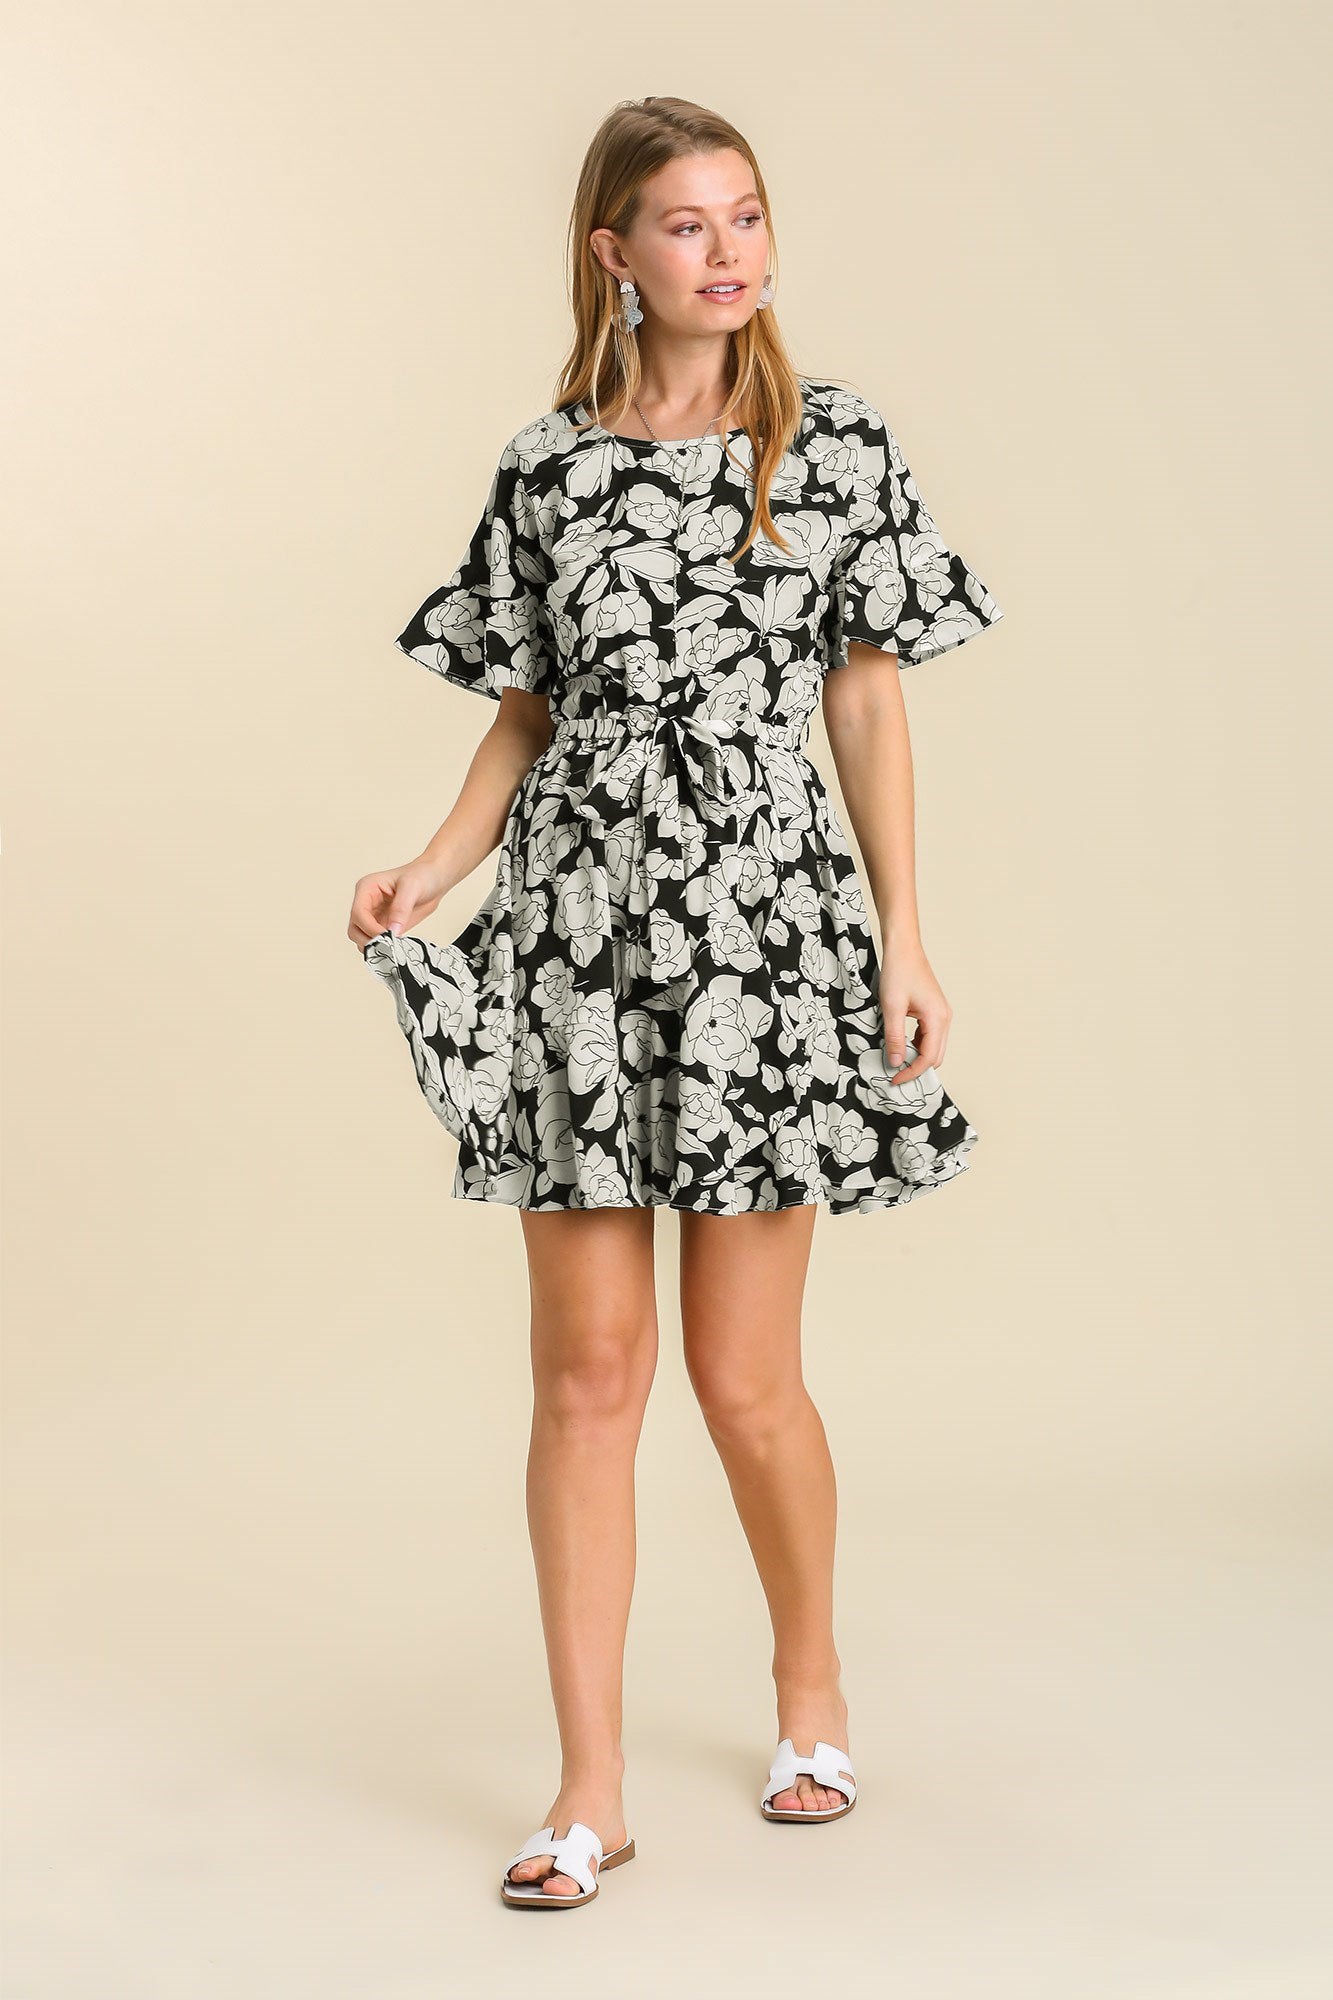 Black and White Floral Dress